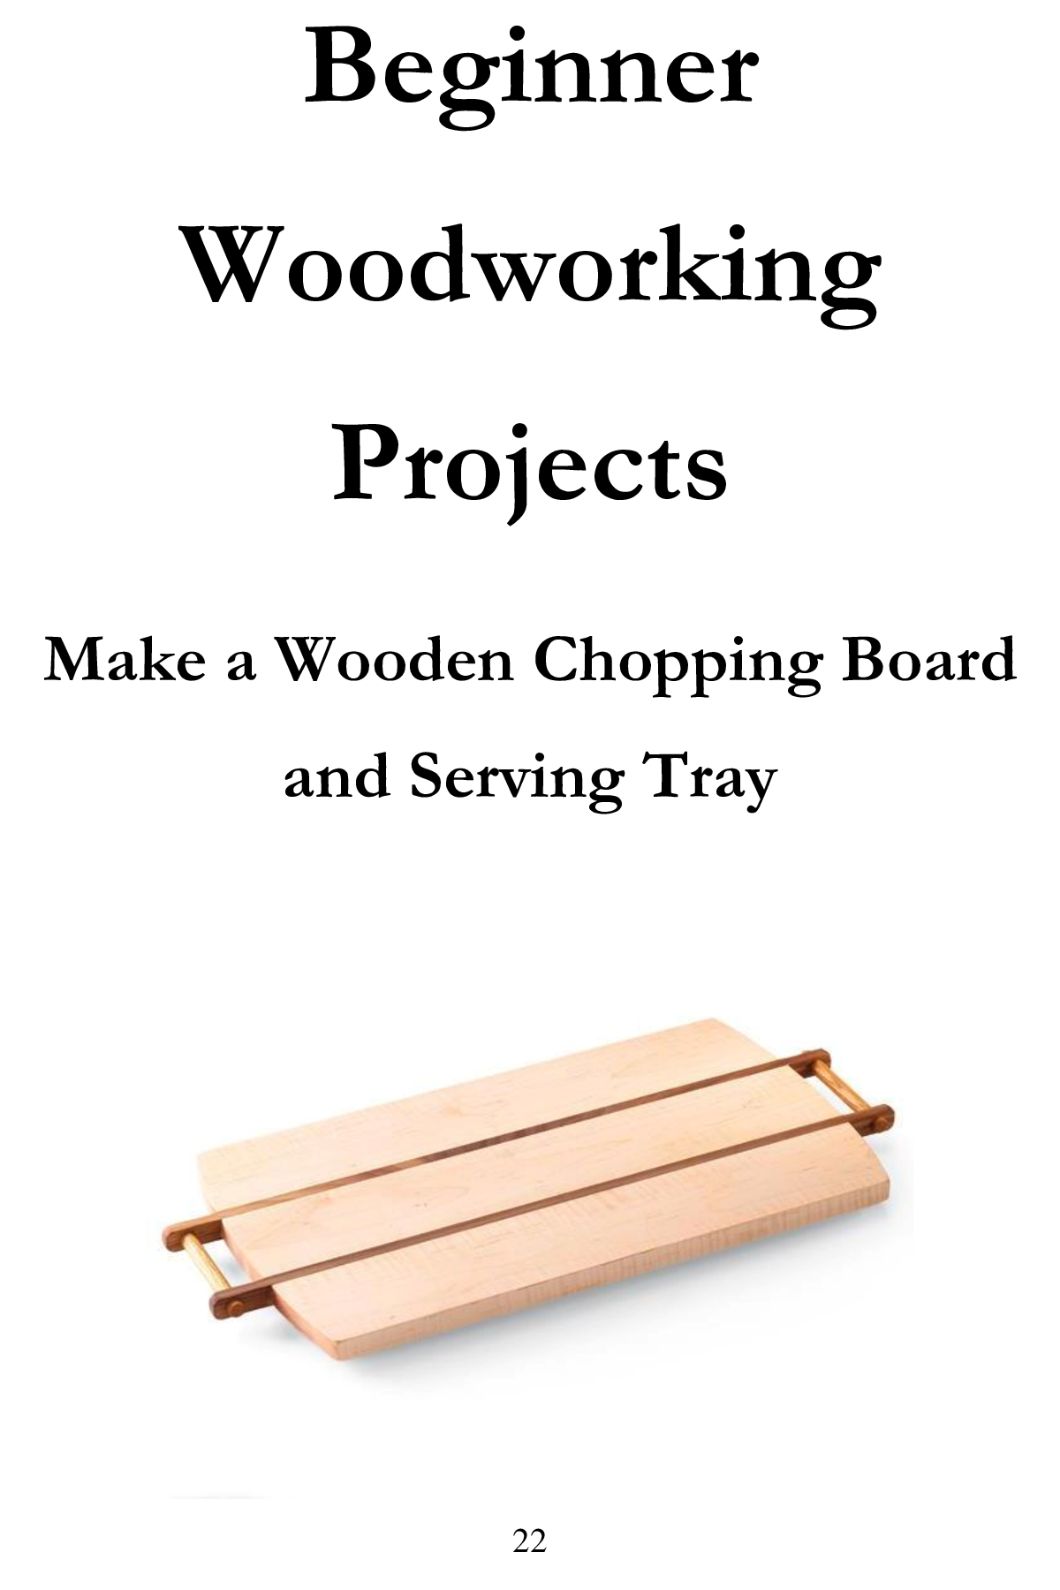 Woodworking Ideas Simple and Detail Woodworking Patterns Beginners Can Try Woodworking Guide Book - photo 24